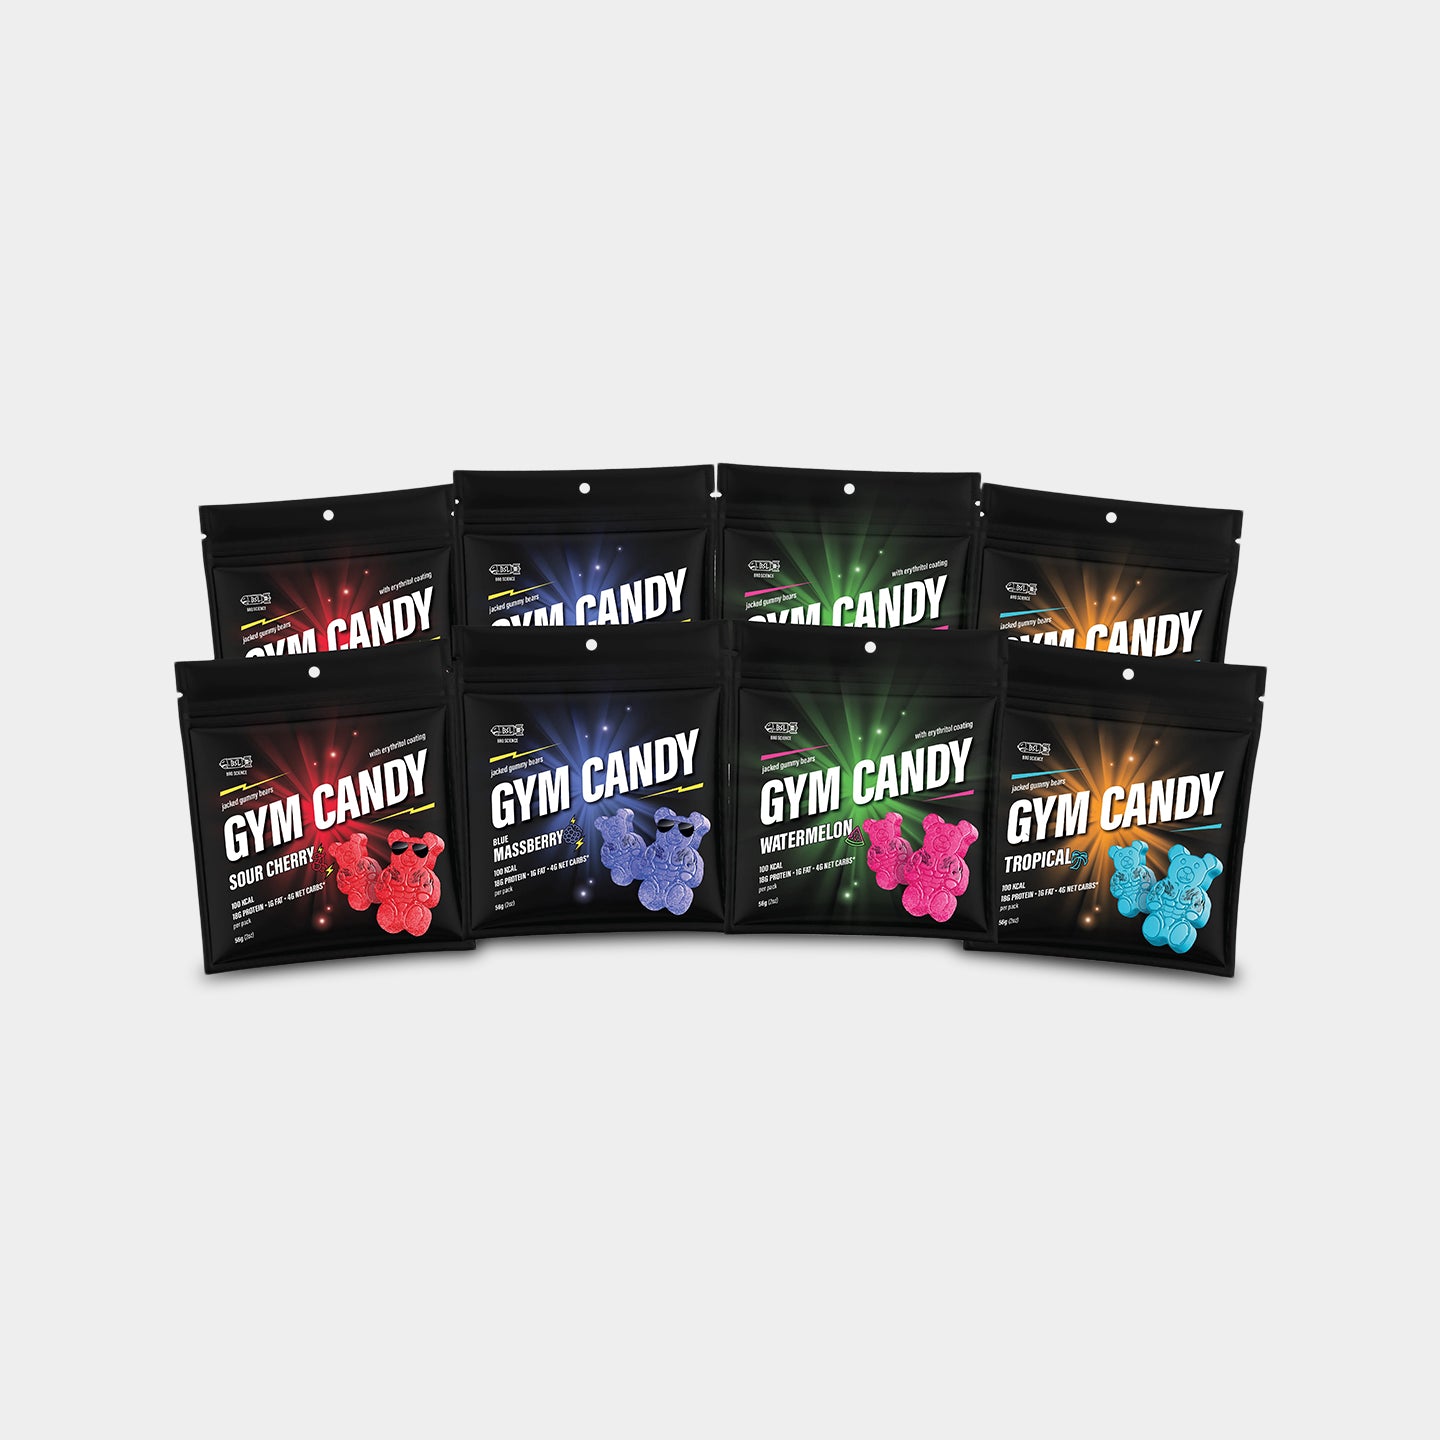 Gym Candy Jacked Gummy Bears, Variety (Watermelon, Tropical, Blue Massberry, and Sour Cherry), 2oz - 8 Pack A1